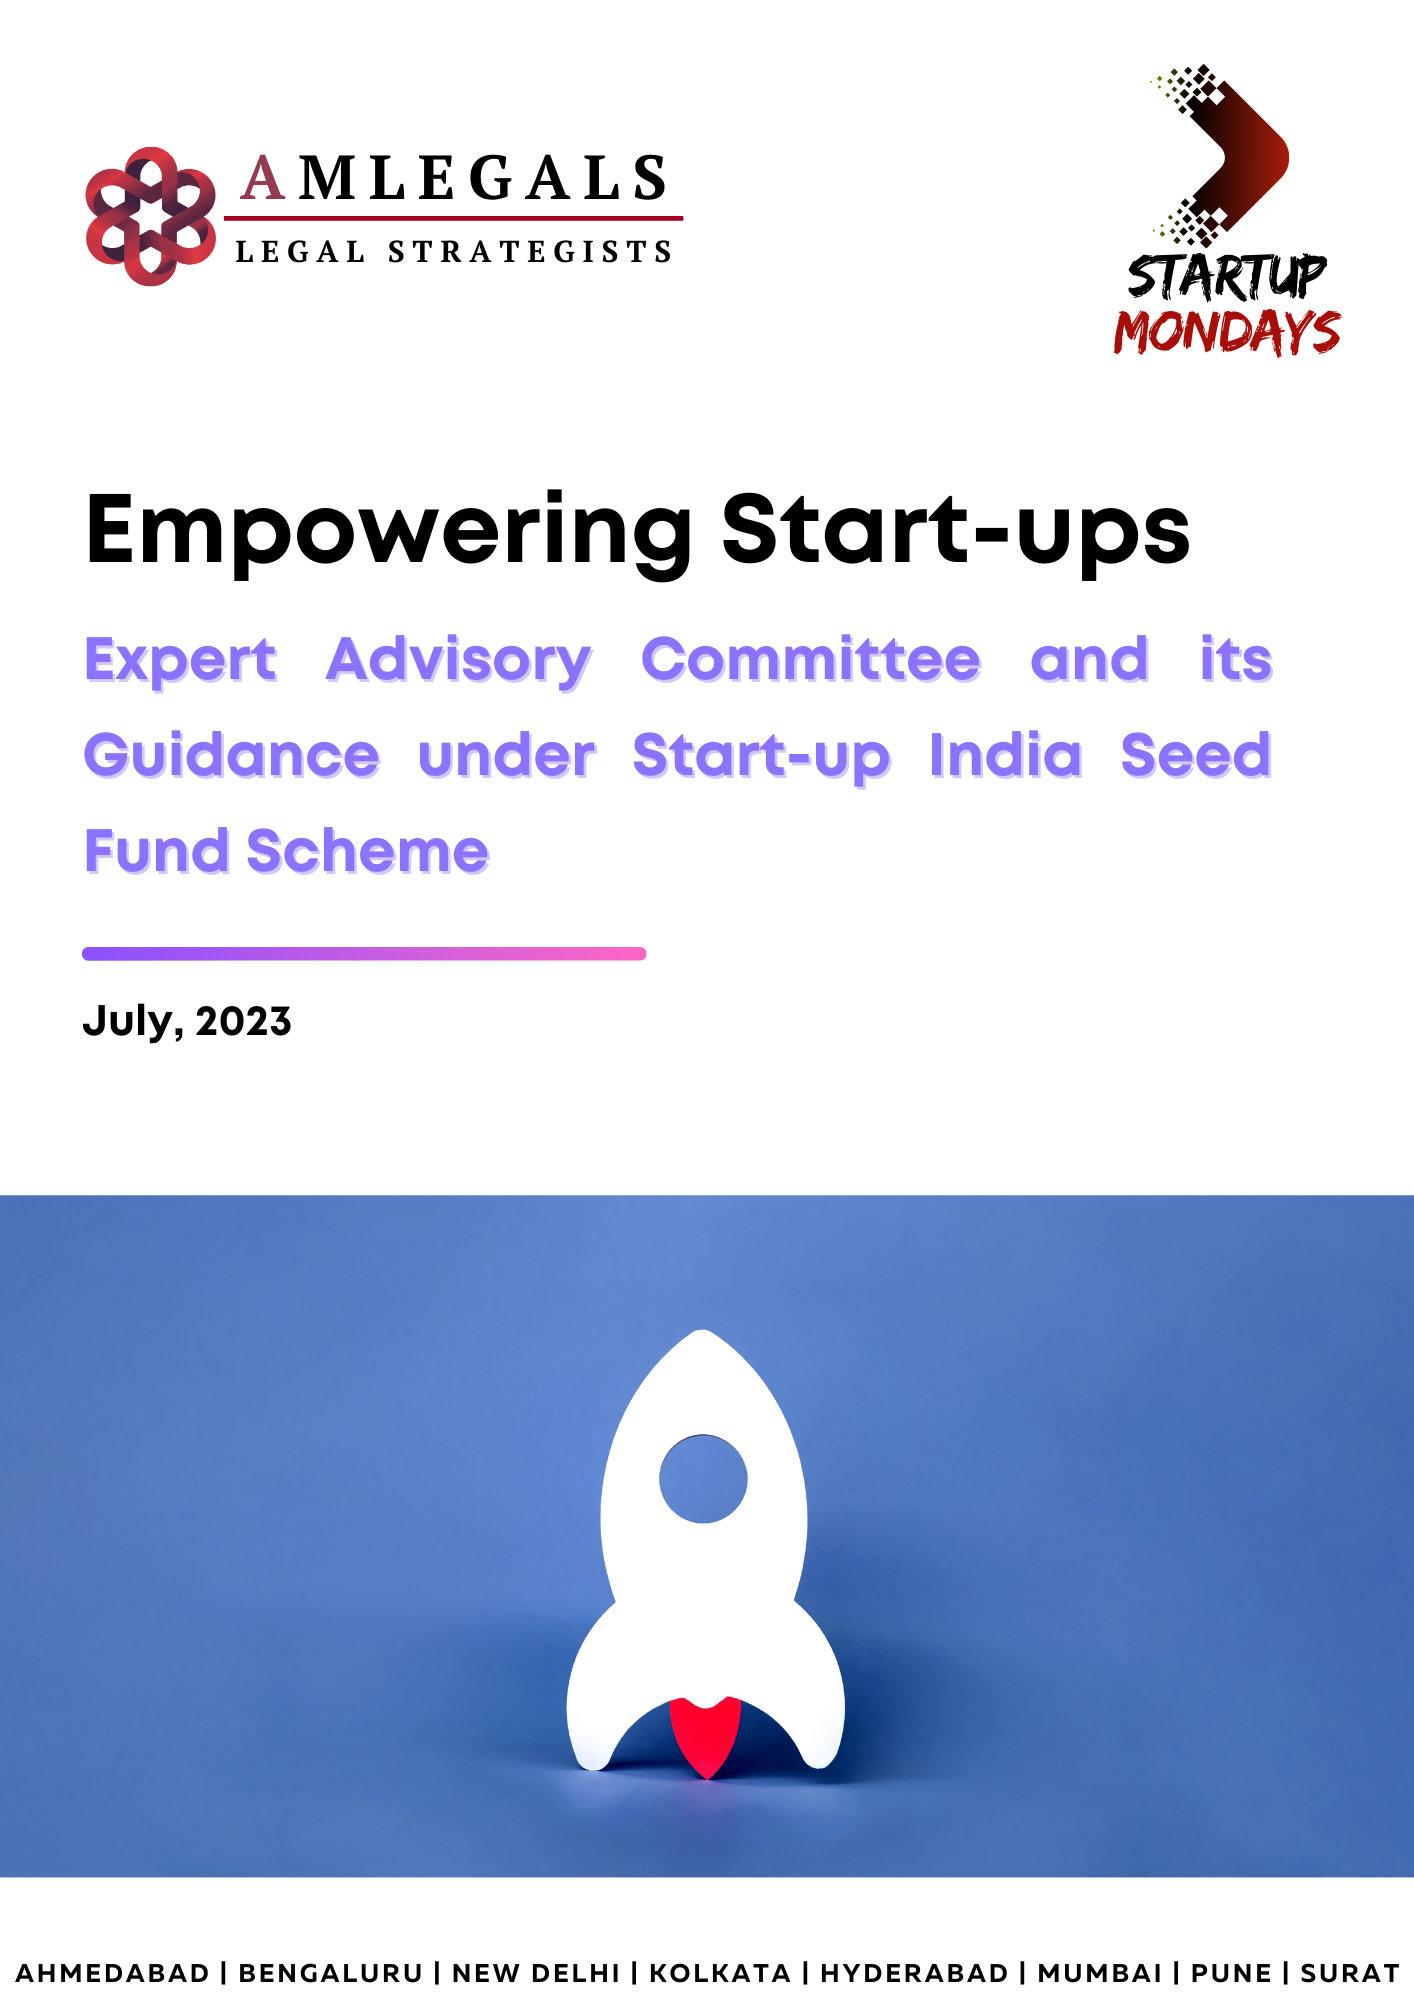 Expert Advisory Committee and its Guidance under Start-up India Seed Fund Scheme